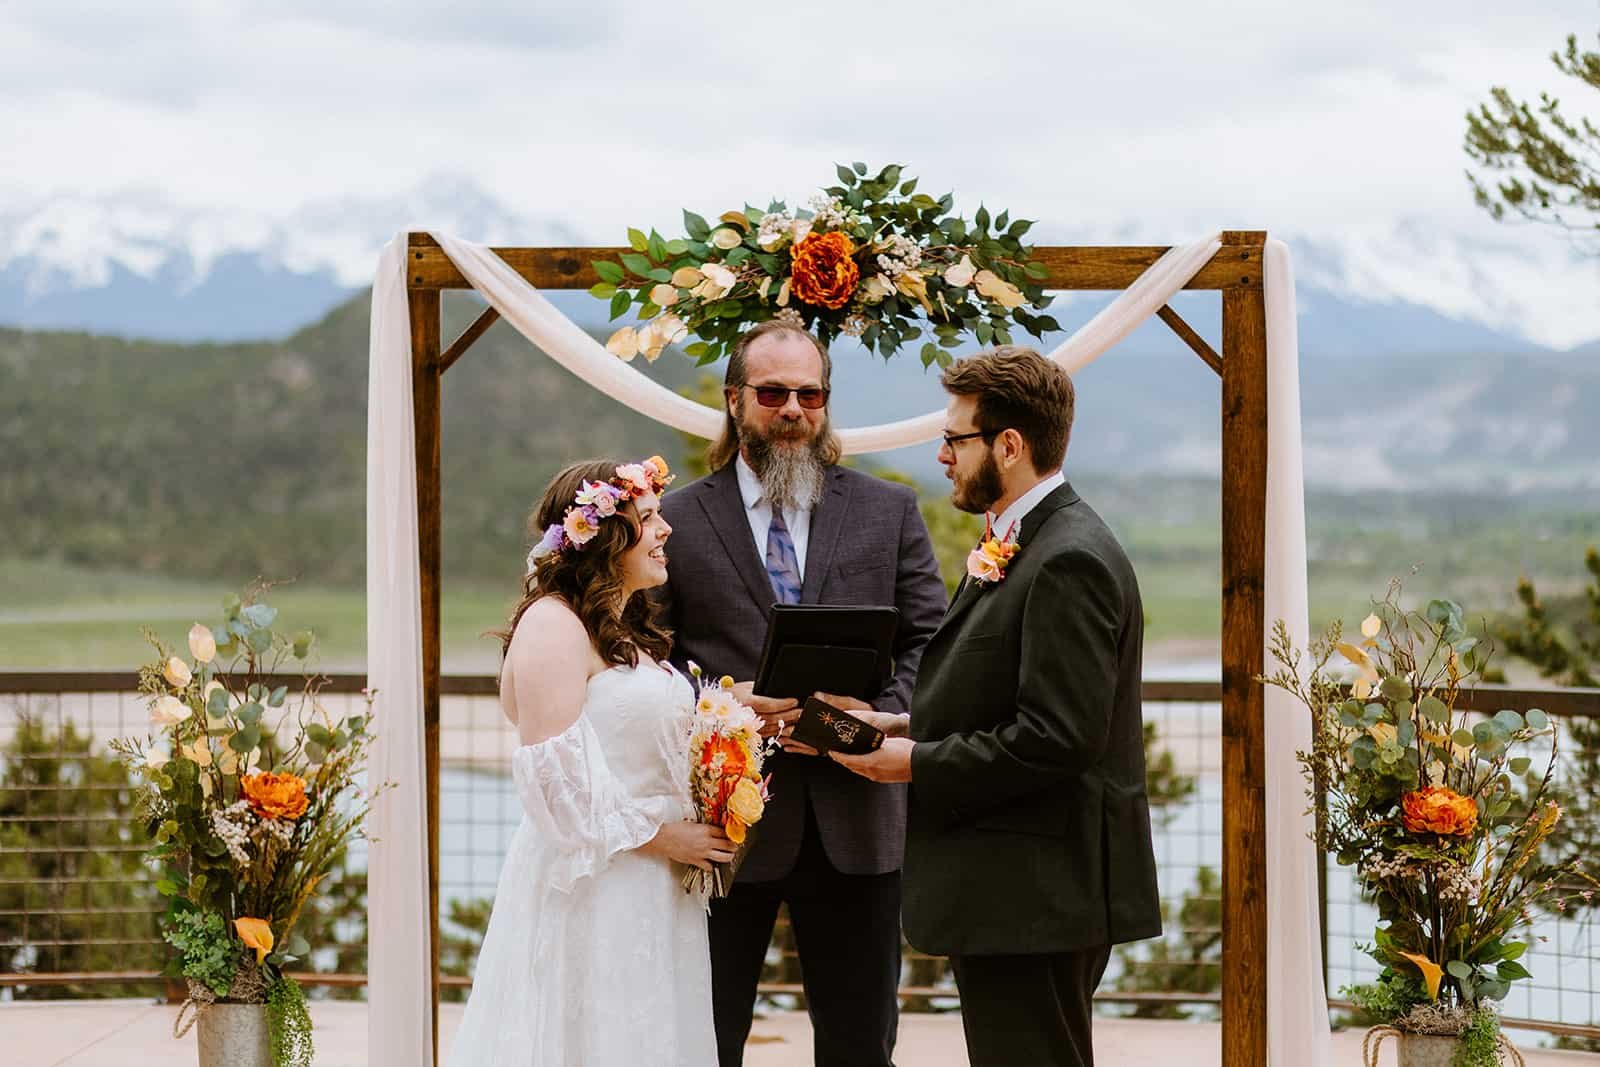 A man and woman stand in front of an arch at Ridgway State Park and the San Juan mountains in the background to get married